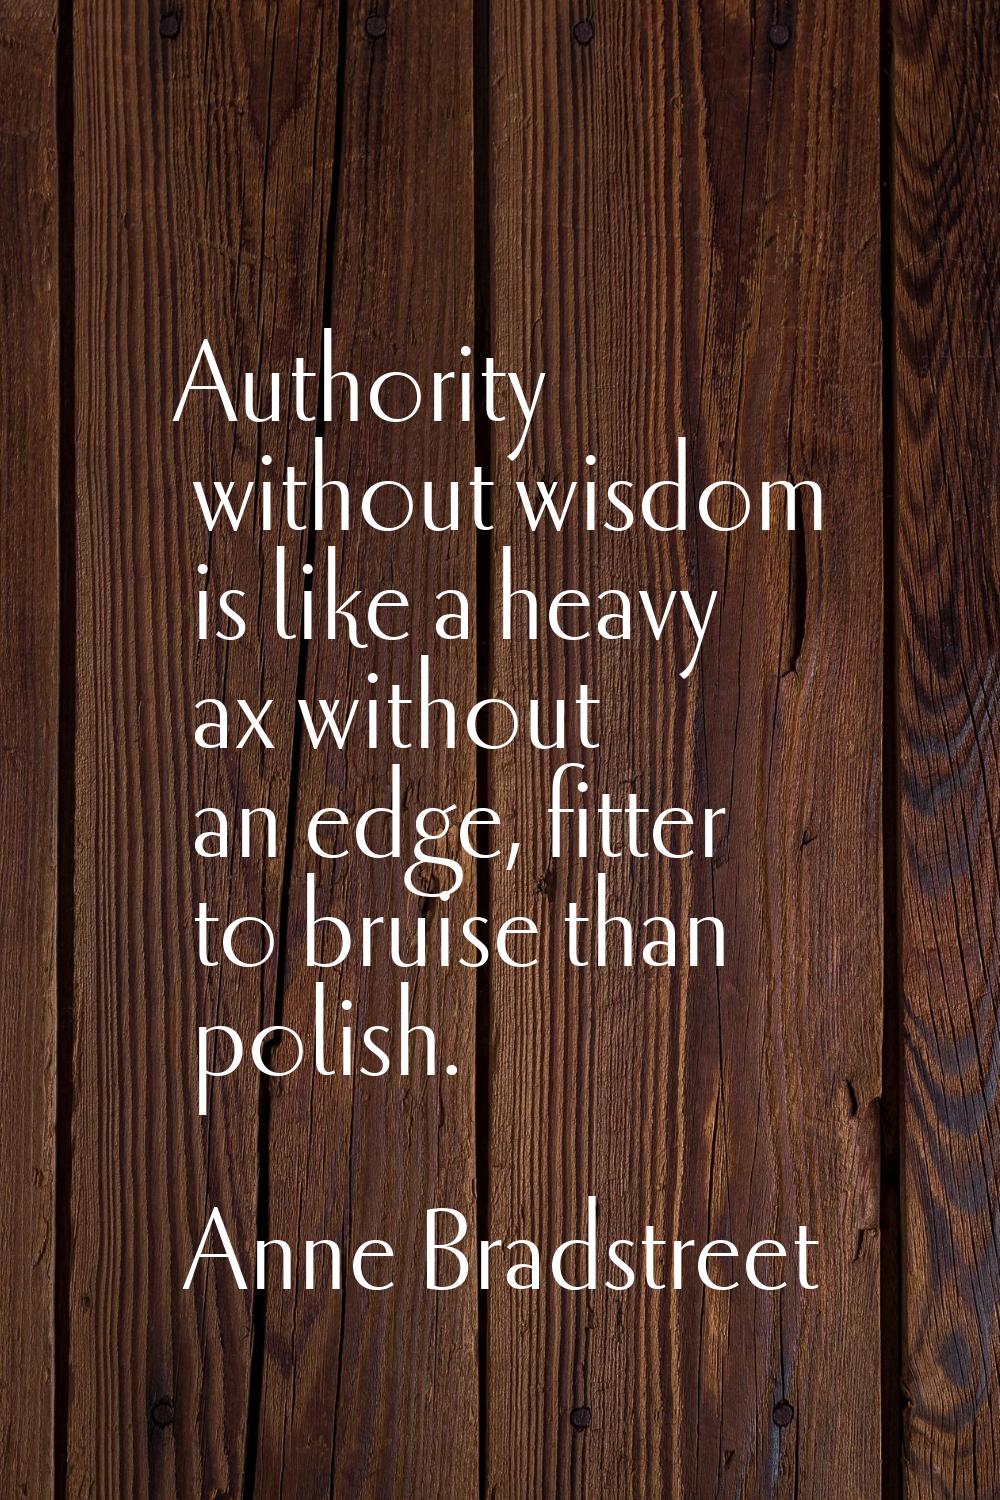 Authority without wisdom is like a heavy ax without an edge, fitter to bruise than polish.